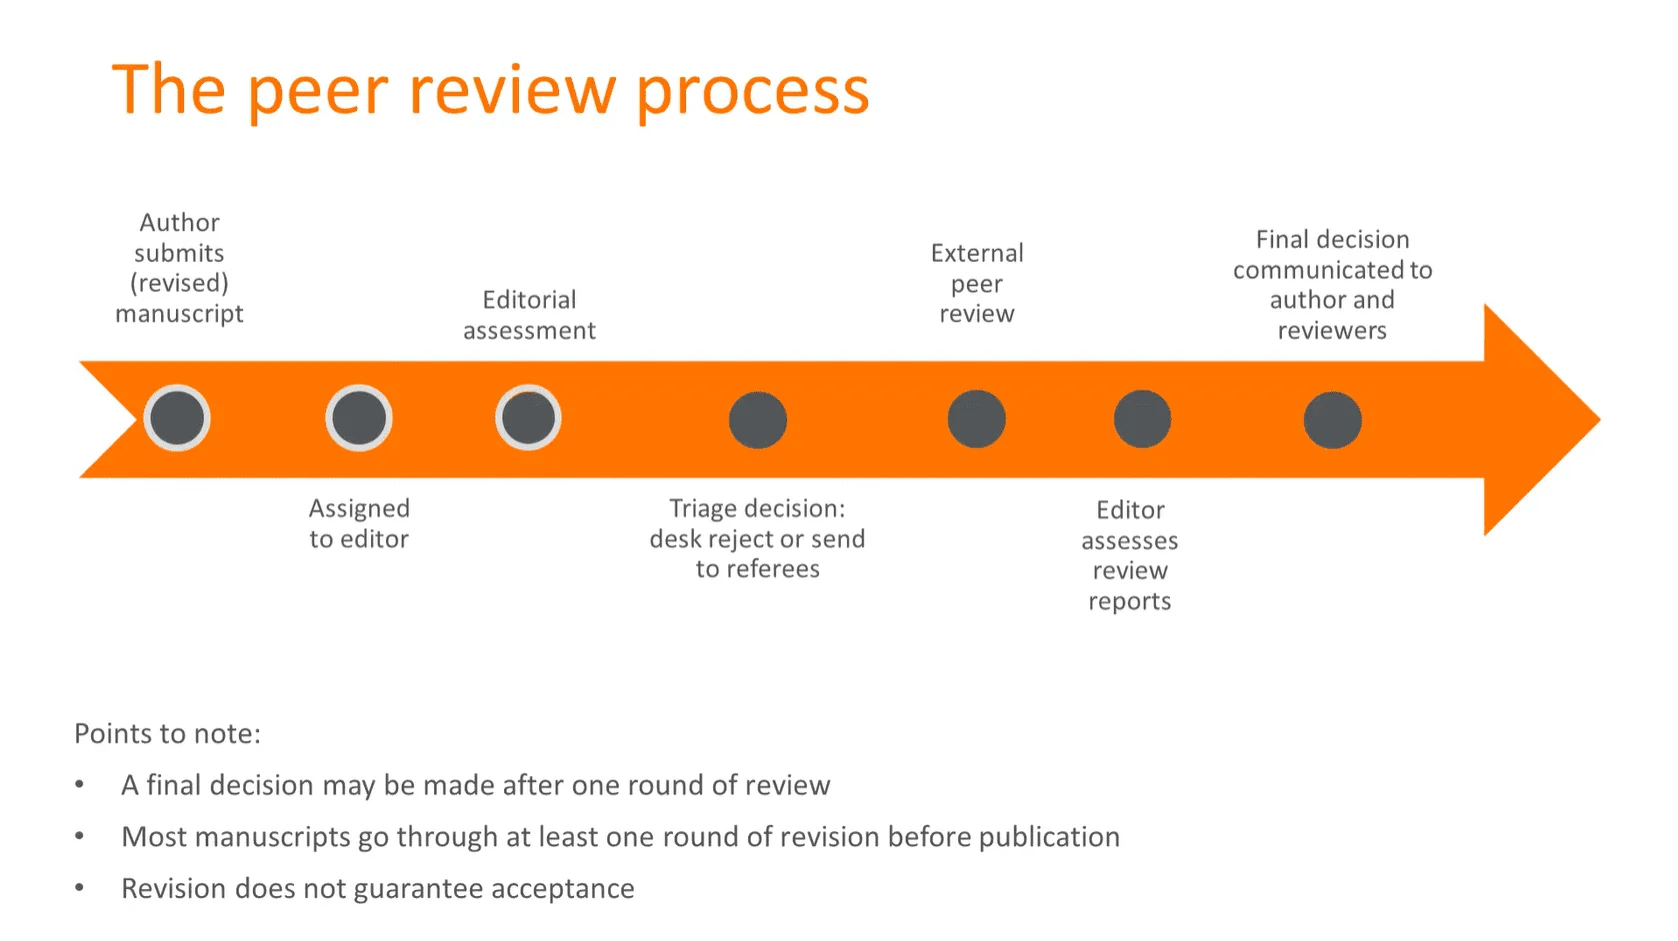 The review process